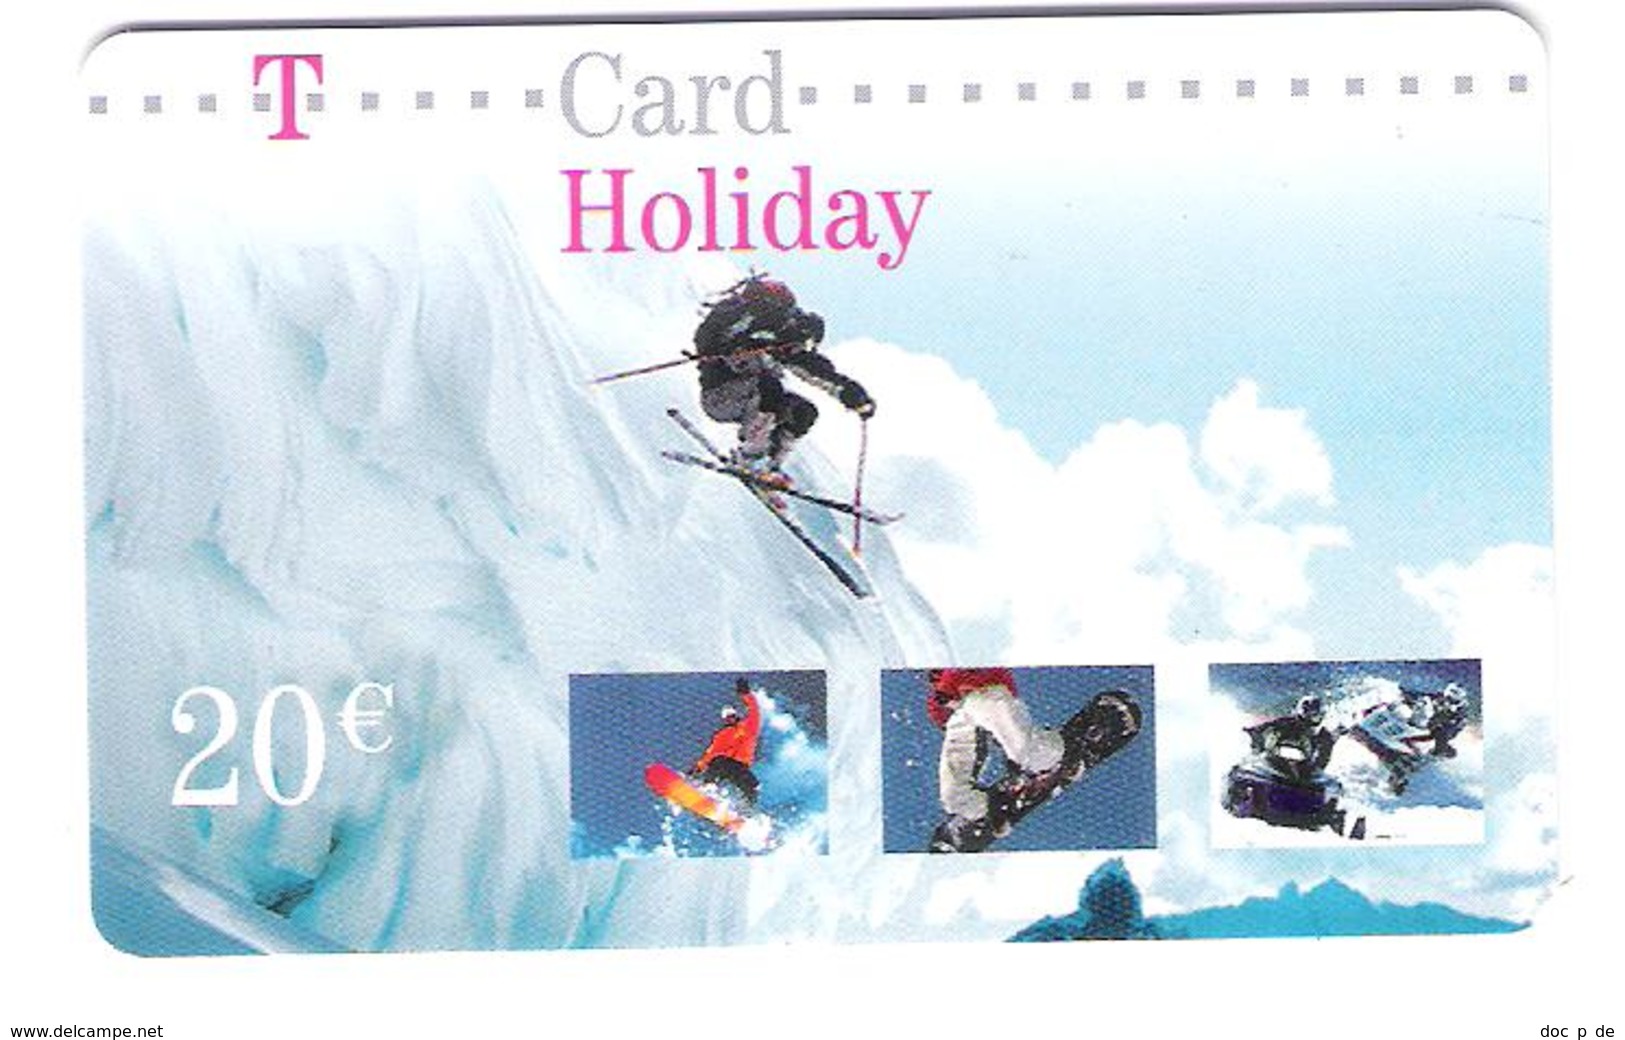 Germany - T-Card Holiday - 20€ - Prepaid Card - Calling Card - Ski - Date : 05/2005 - [3] T-Pay  Micro-Money